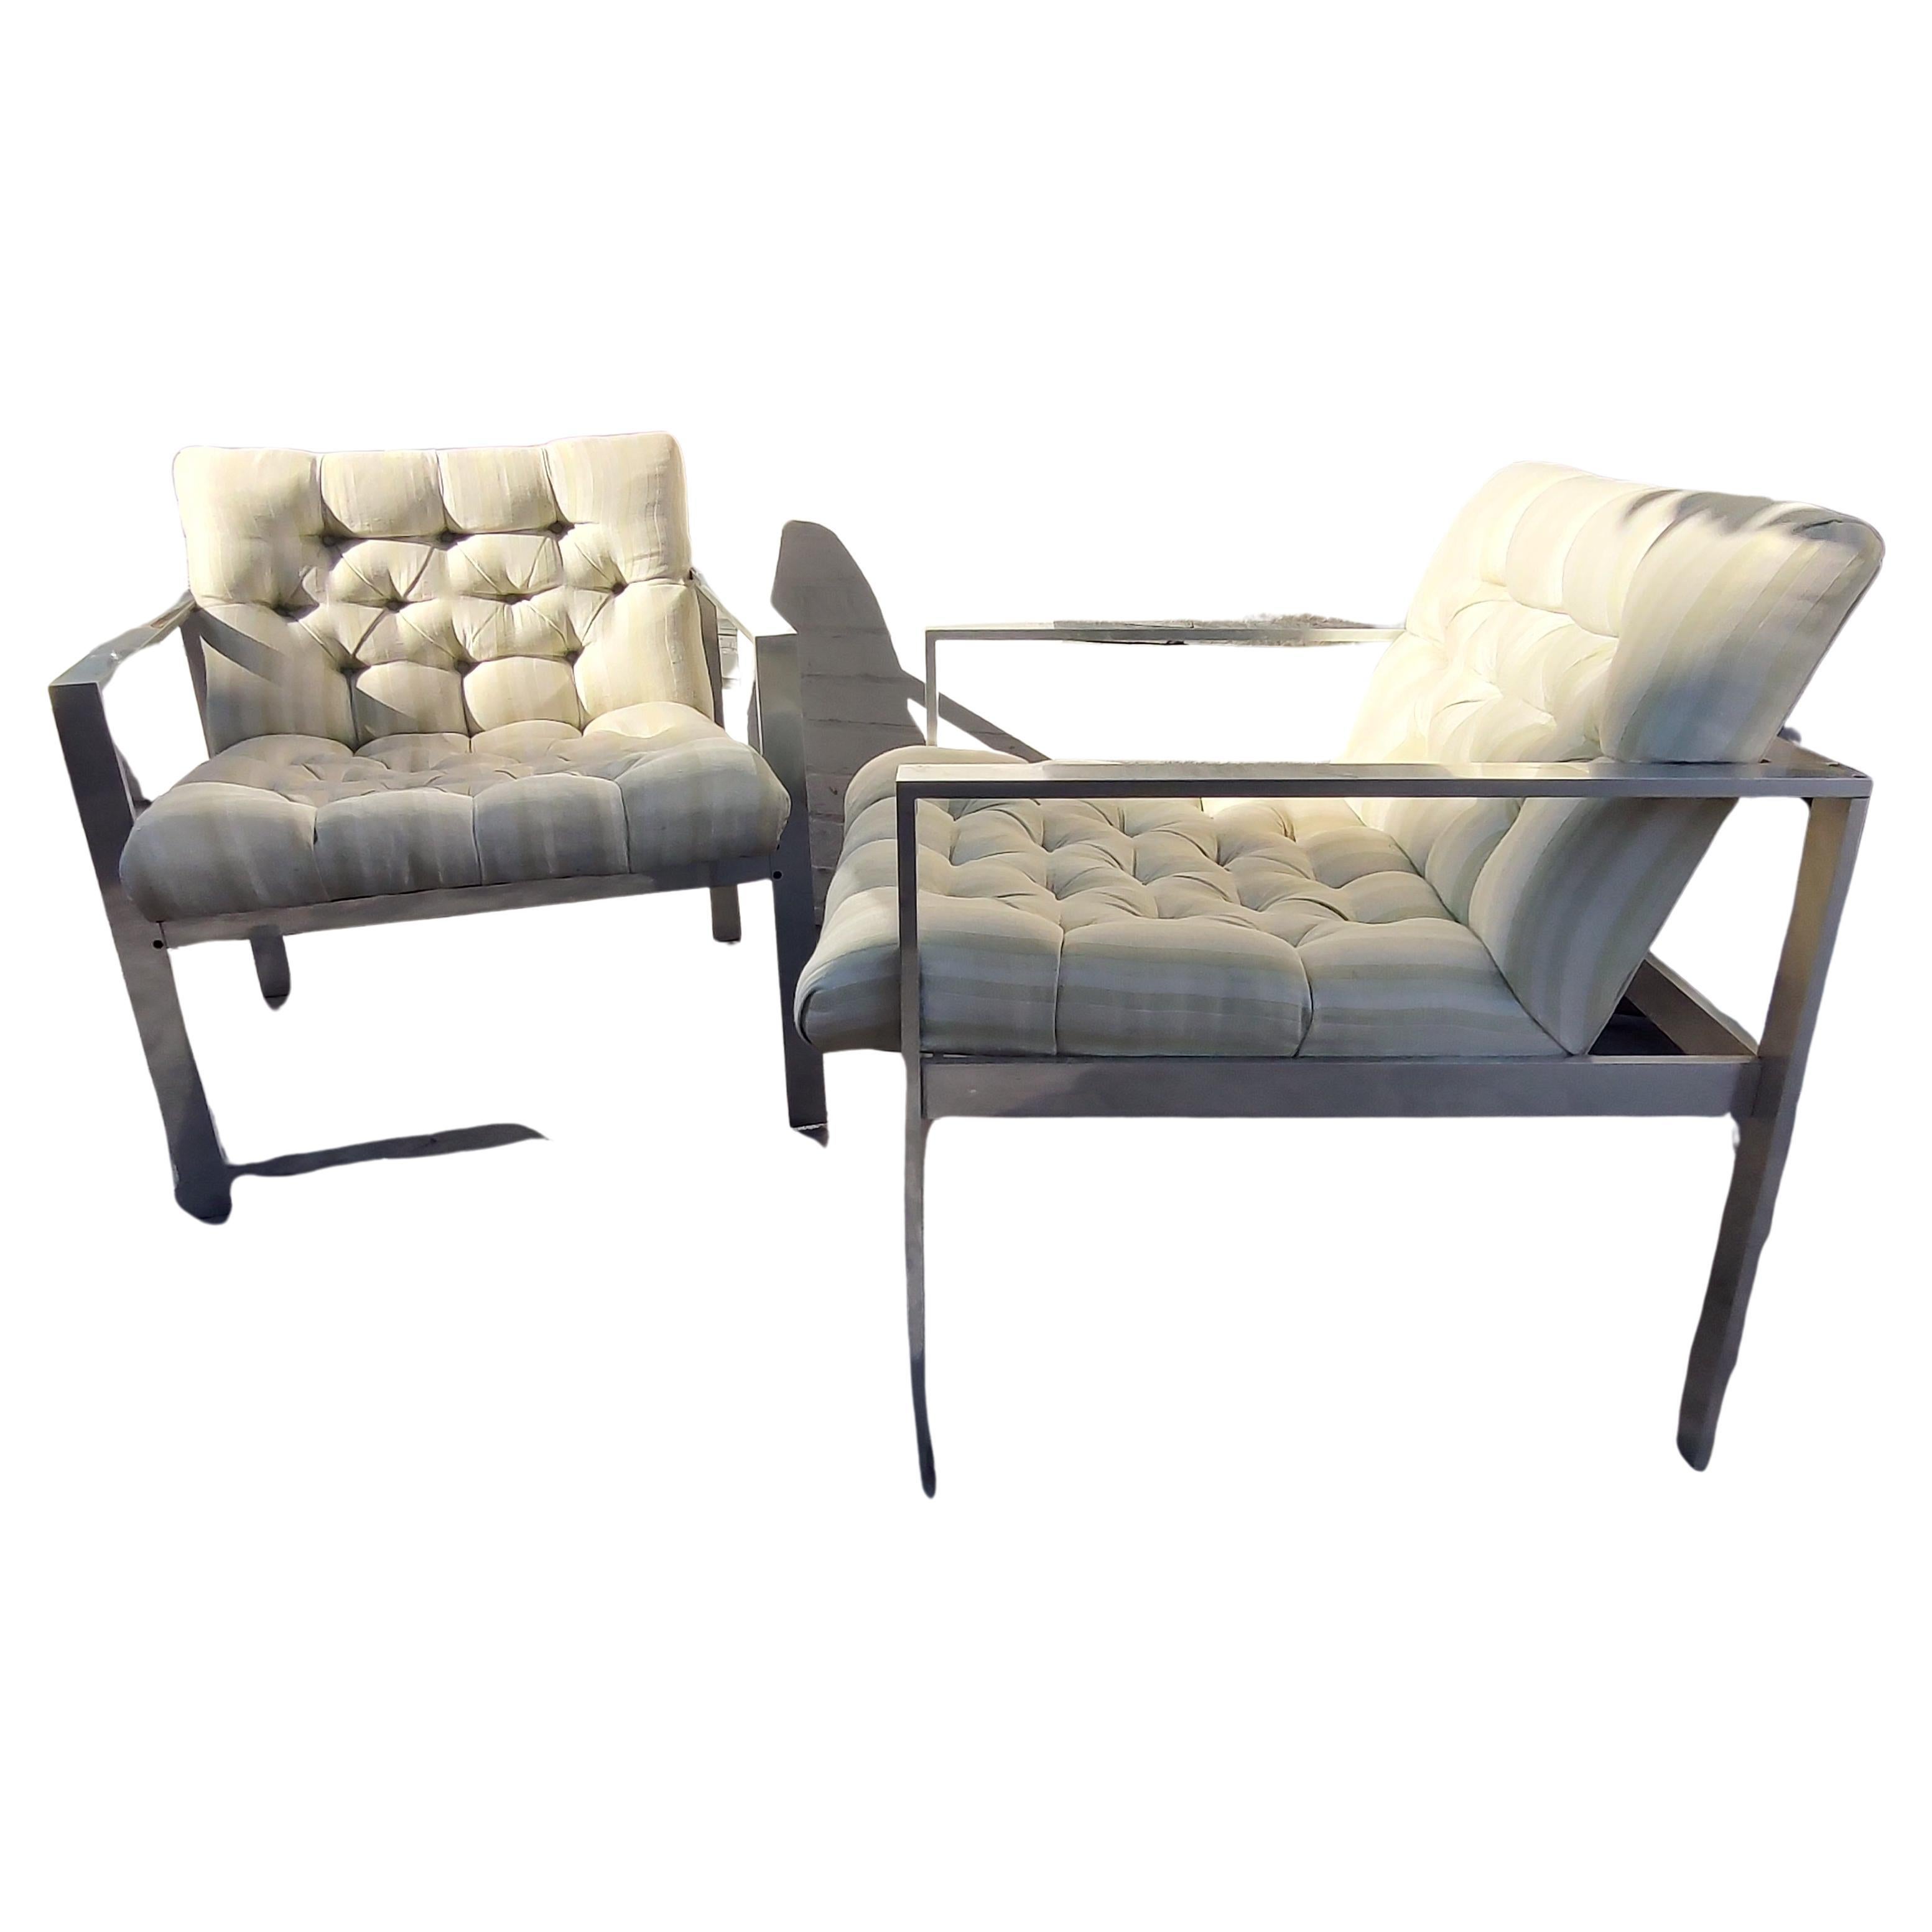 Simple and elegant pair of Mid-Century Modern Sculptural tufted lounge chairs by Harvey Probber. Alcoa aluminum is the main material making up the beautiful frames. Button tufted with a nice striped material. In excellent vintage condition, minor